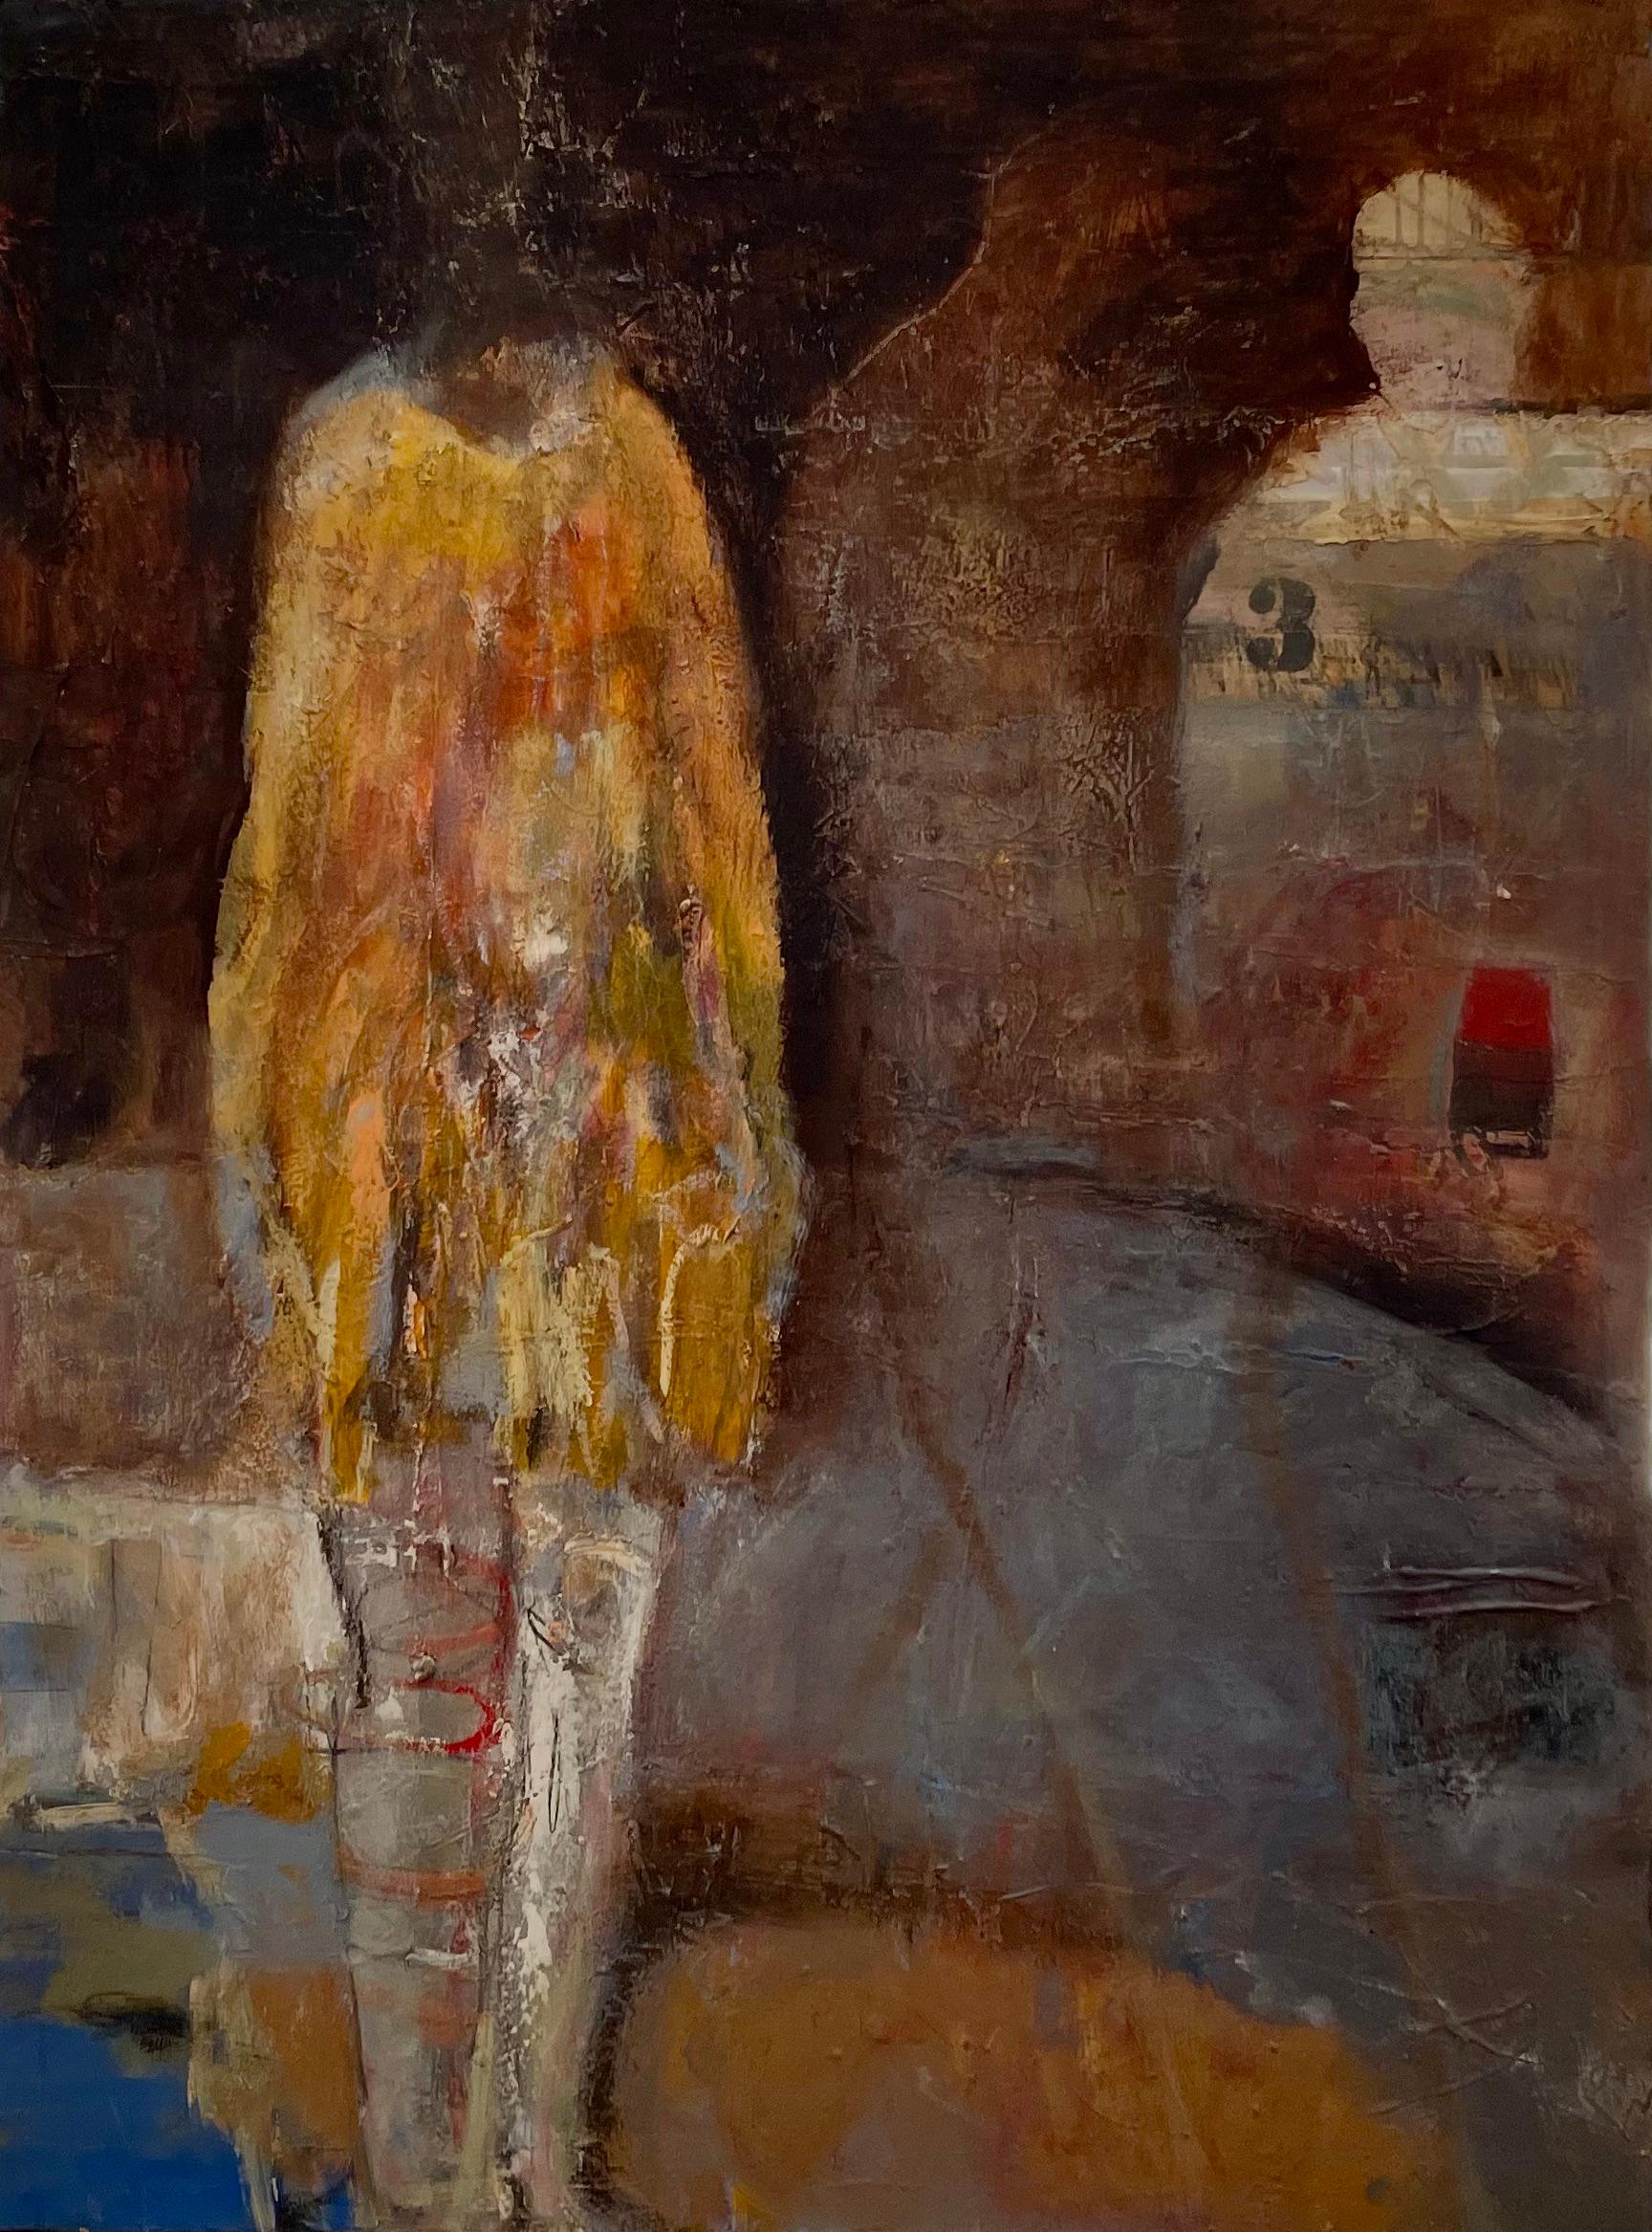 Helen Steele Figurative Painting - "Lost" Mixed Media Contemporary Figurative Abstract Expressionist 